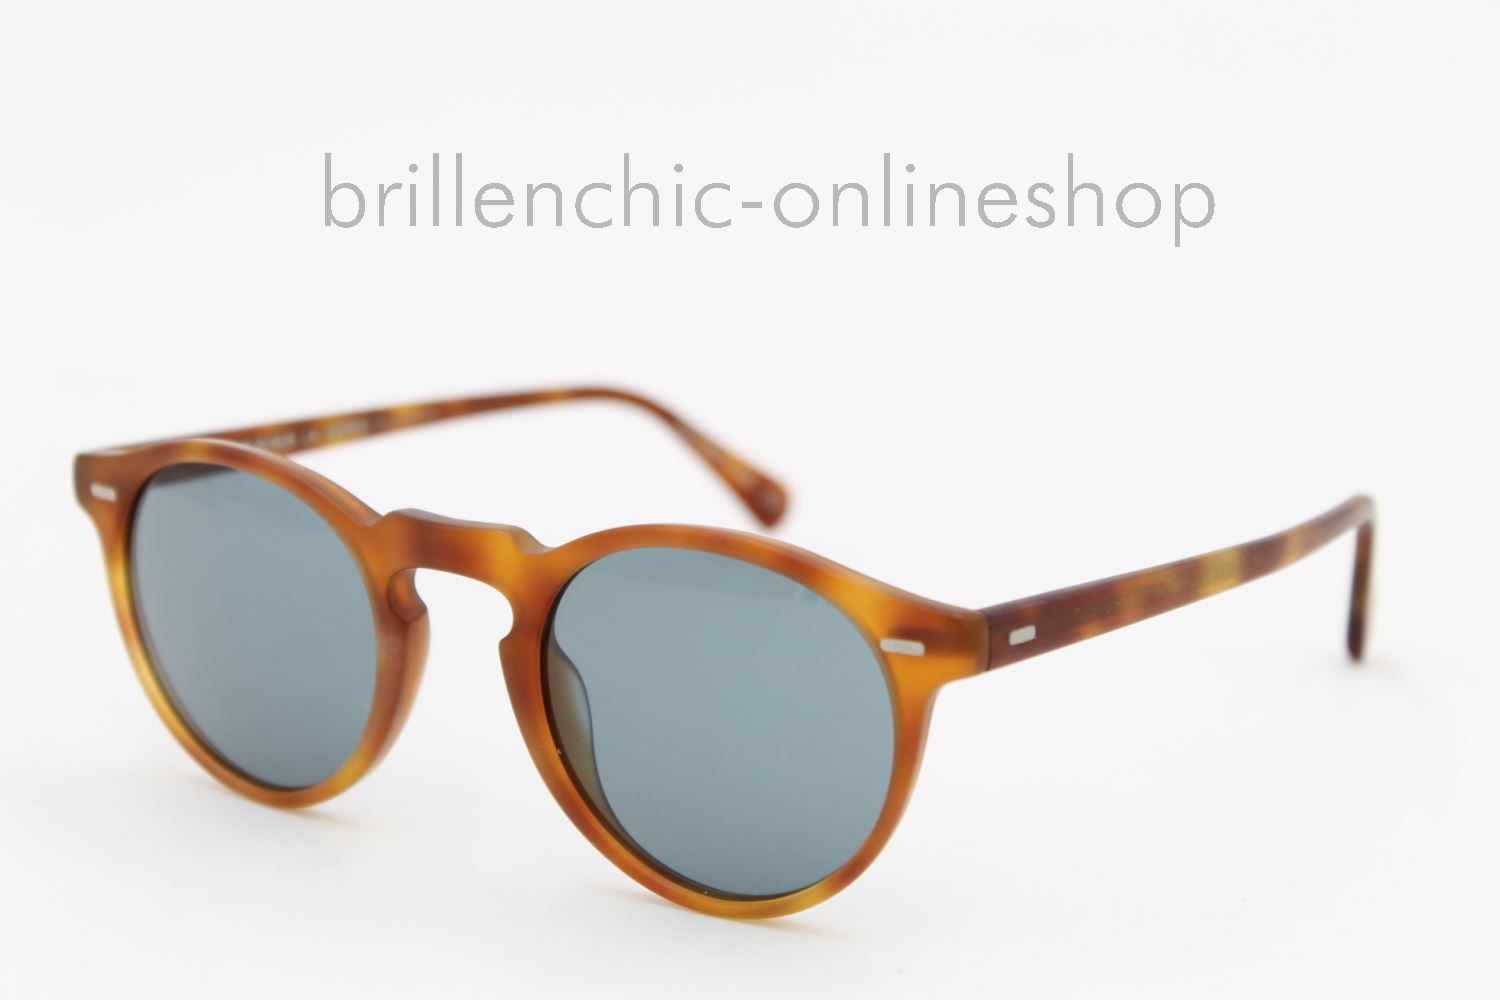 Brillenchic-onlineshop in Berlin - OLIVER PEOPLES GREGORY PECK SUN OV 5217S  5217 1483/R8 